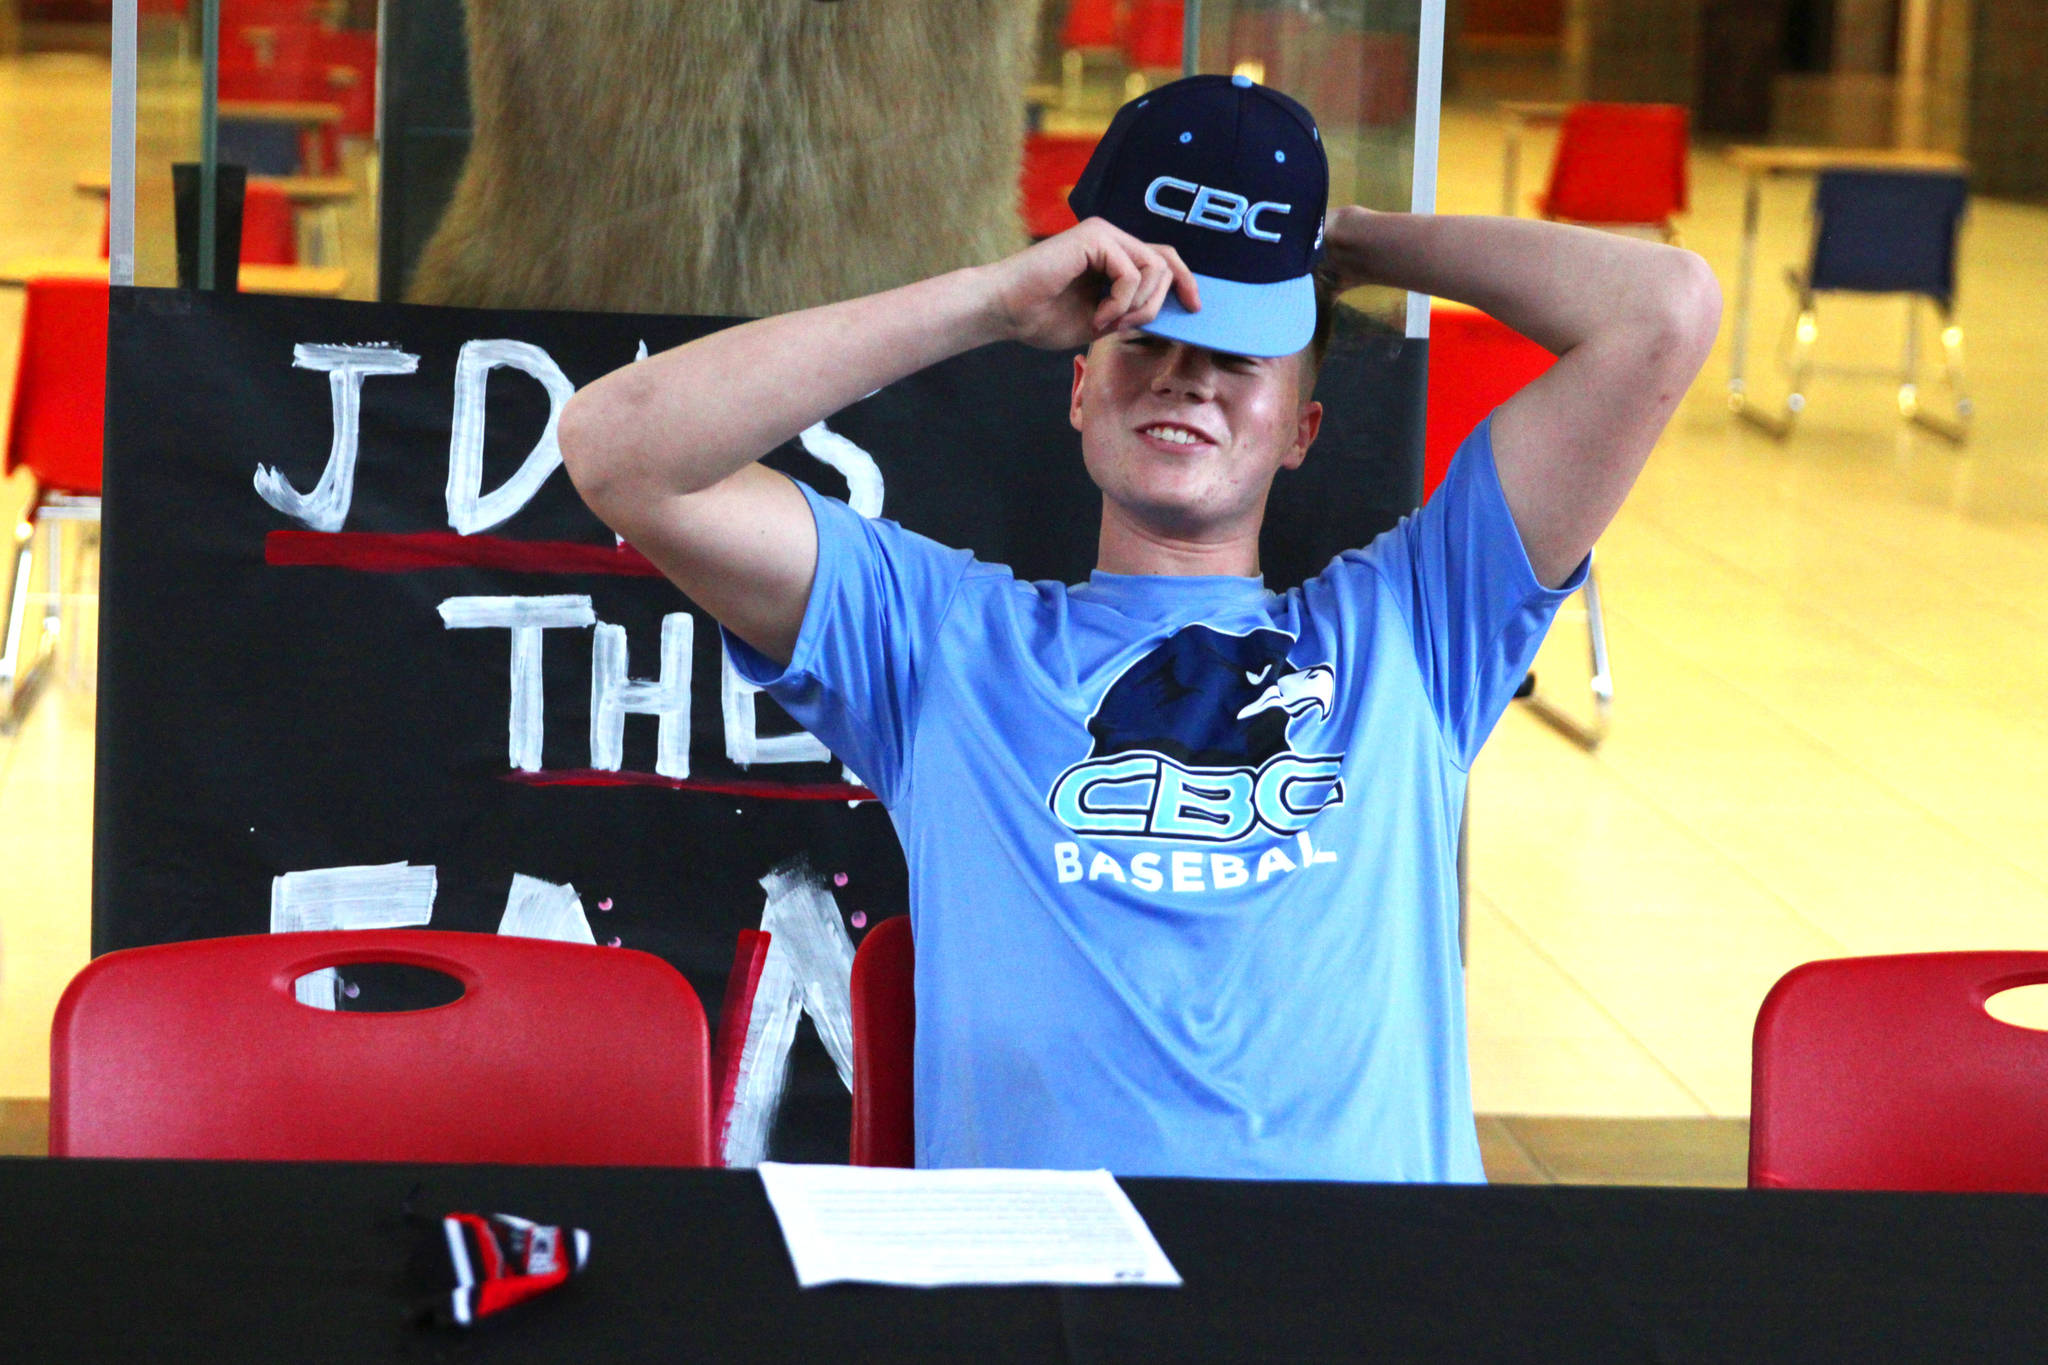 Juneau-Douglas High School Yadaa.at Kalé senior Garrett Bryant signed his letter of intent to play baseball for Columbia Basin College at JDHS on March 11, 2021. (Michael S. Lockett / Juneau Empire)